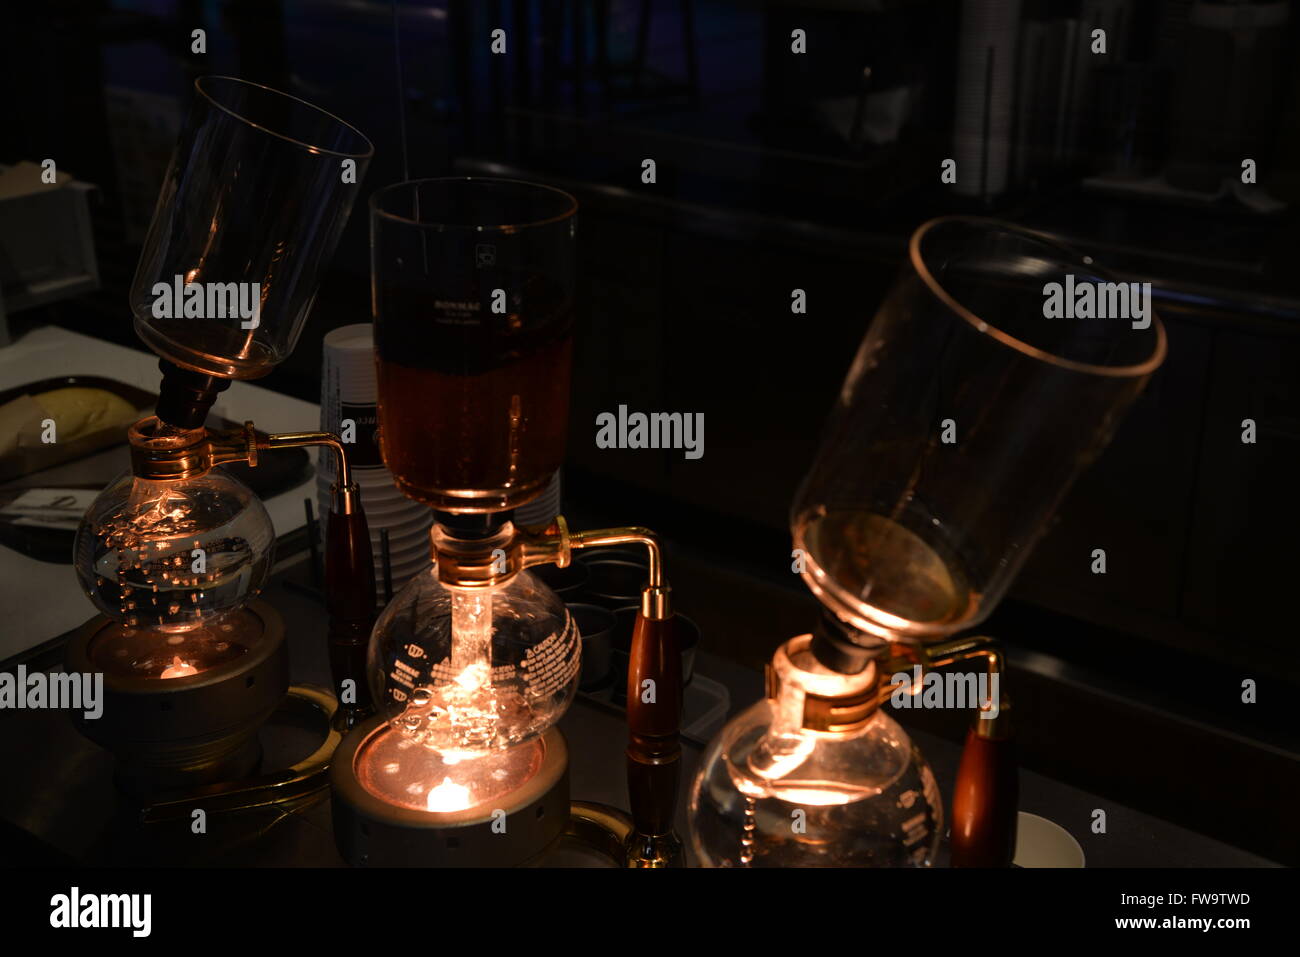 https://c8.alamy.com/comp/FW9TWD/glass-vacuum-coffee-makers-in-a-coffee-shop-in-kyoto-japan-FW9TWD.jpg